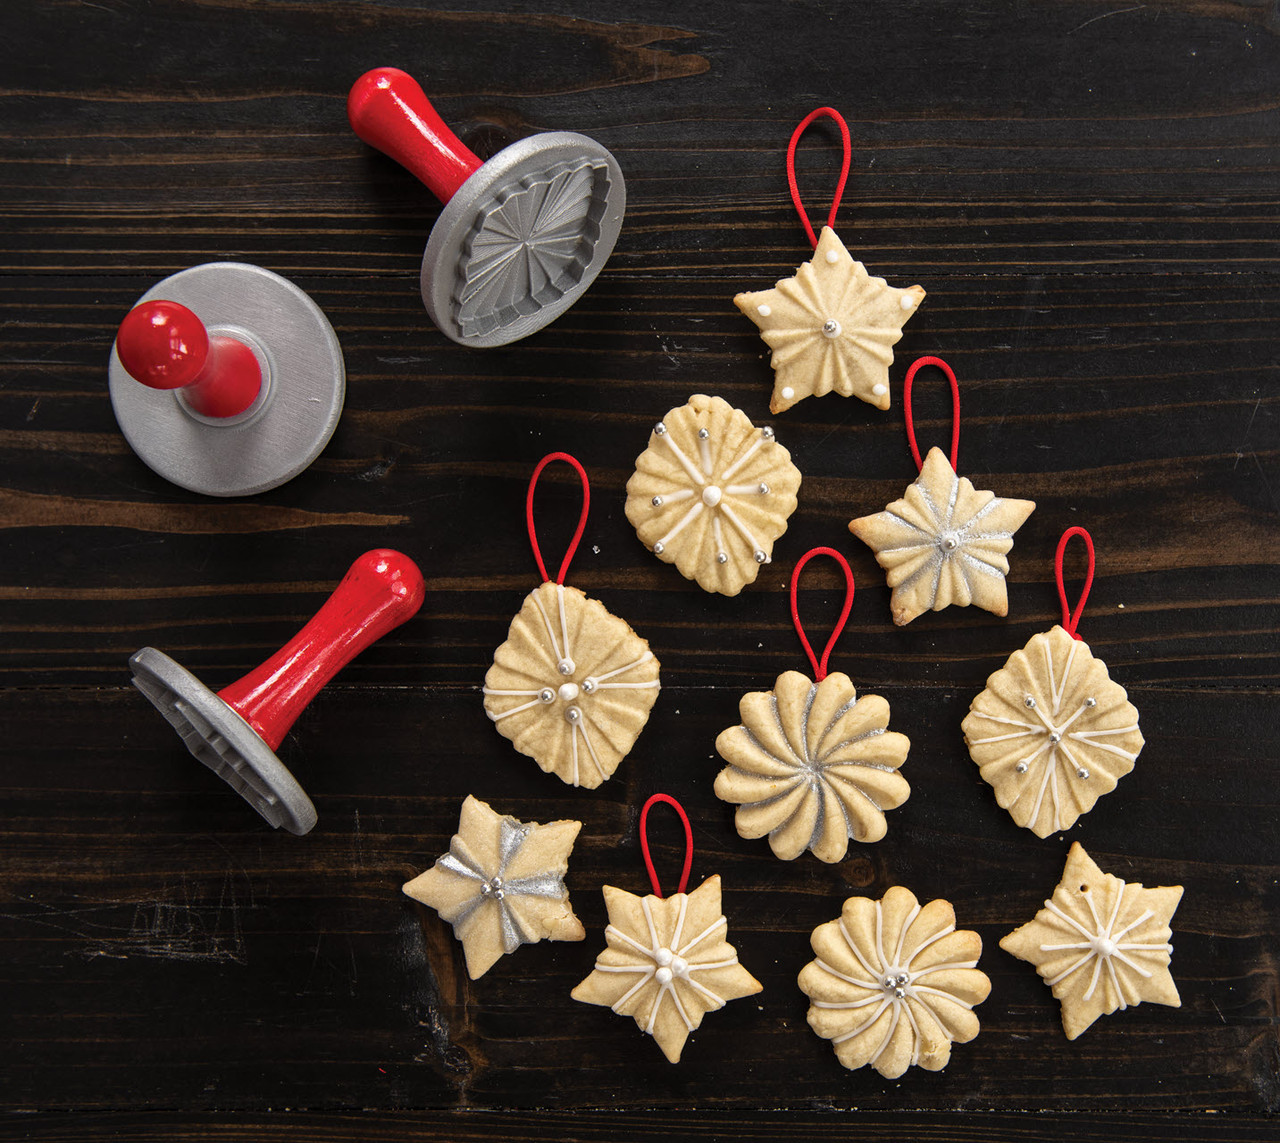 Nordic Cookie Stamps Are the Best Way to Decorate Holiday Cookies